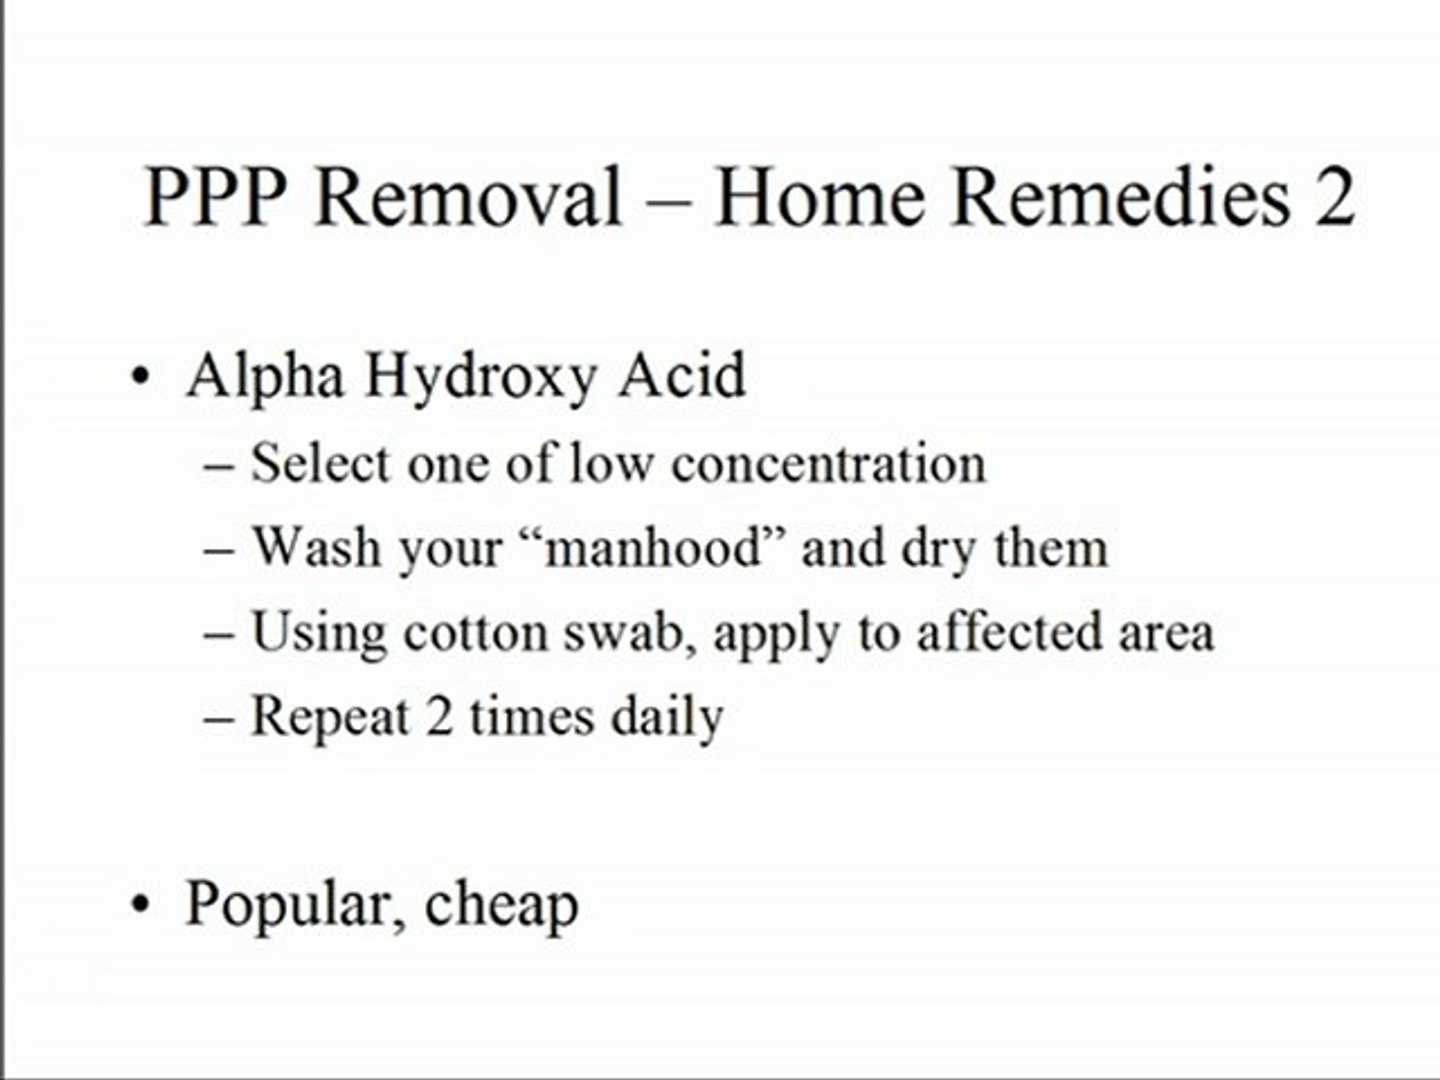 Remove papules to penile how naturally pearly How to